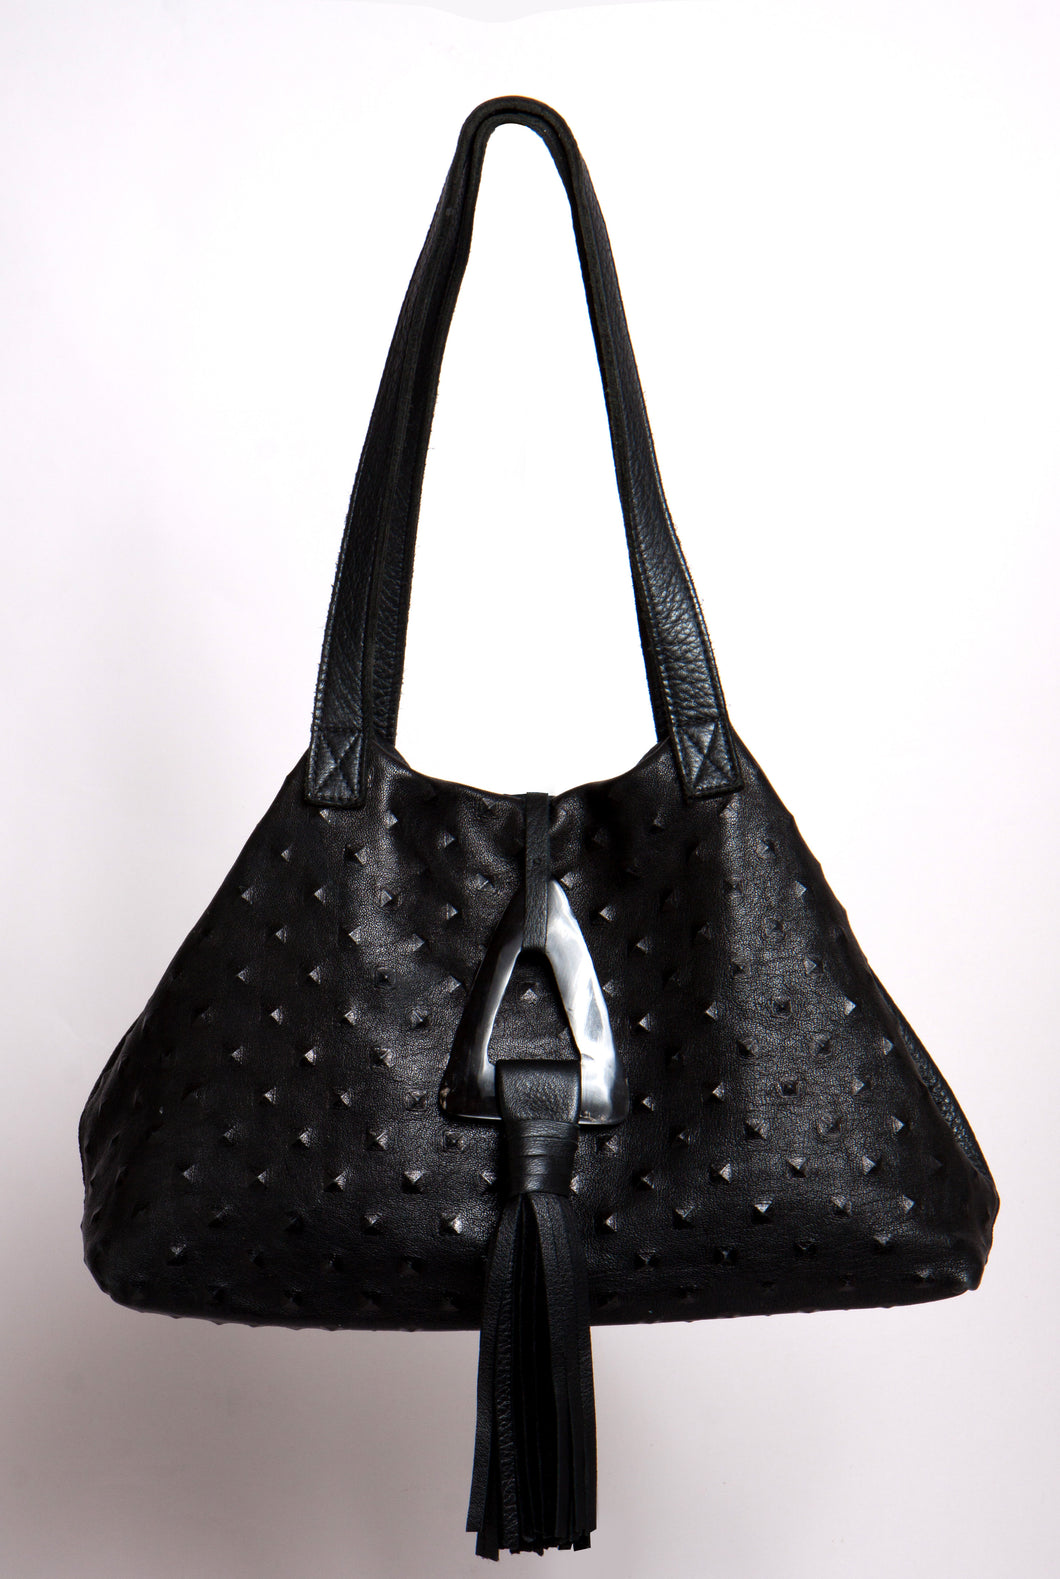 <b>Stacie</b><br> <p><font size=“3px”> Black Pyramid Tote With Horn Tassel</font></p>